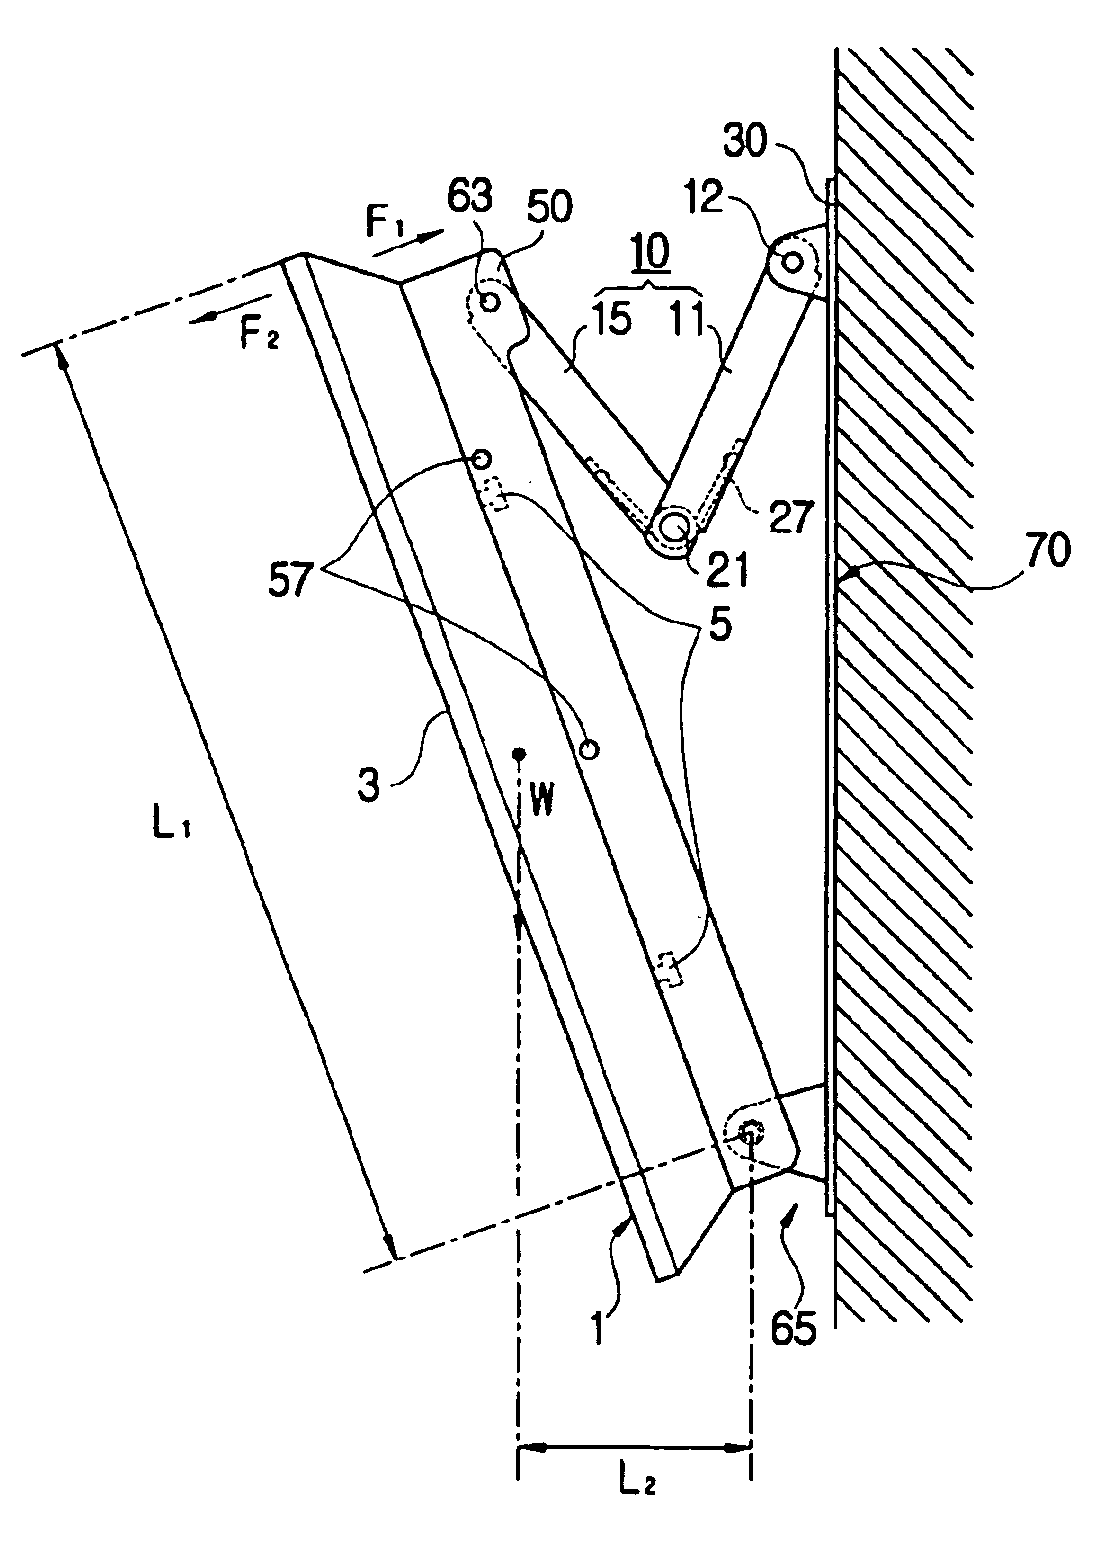 Display apparatus having a structure for wall mounting